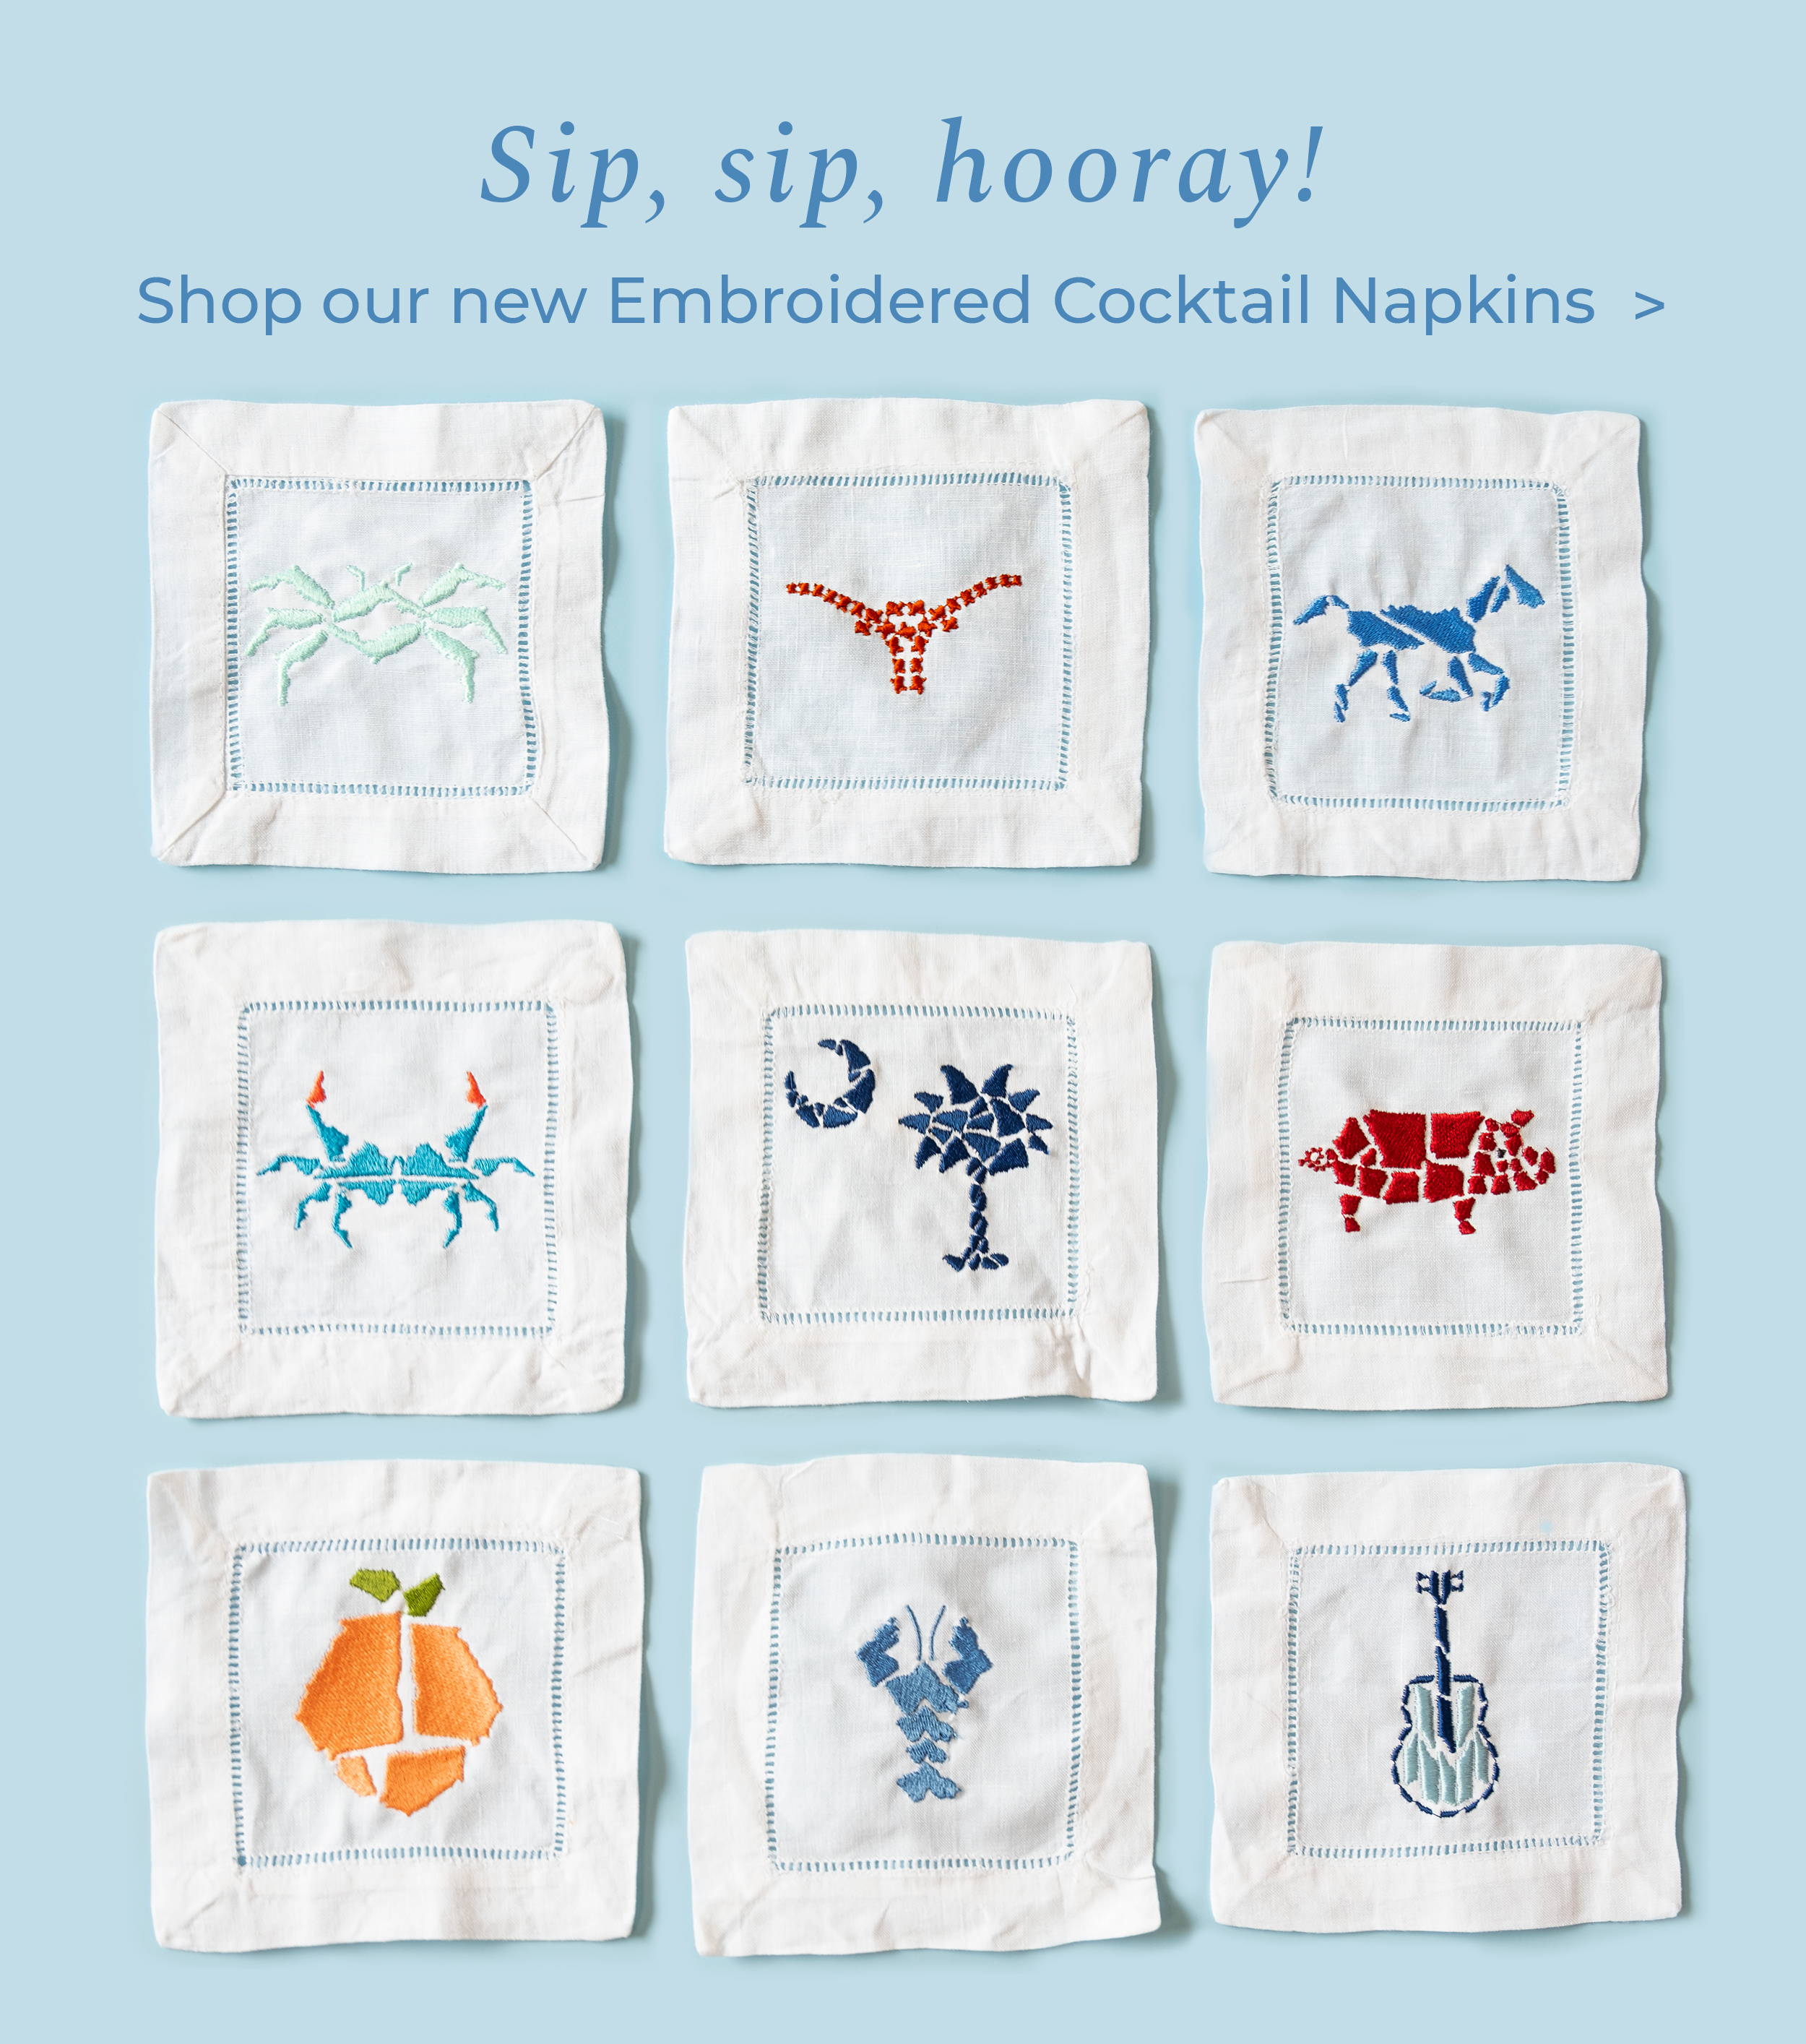 New Embroidered Cocktail Napkins!